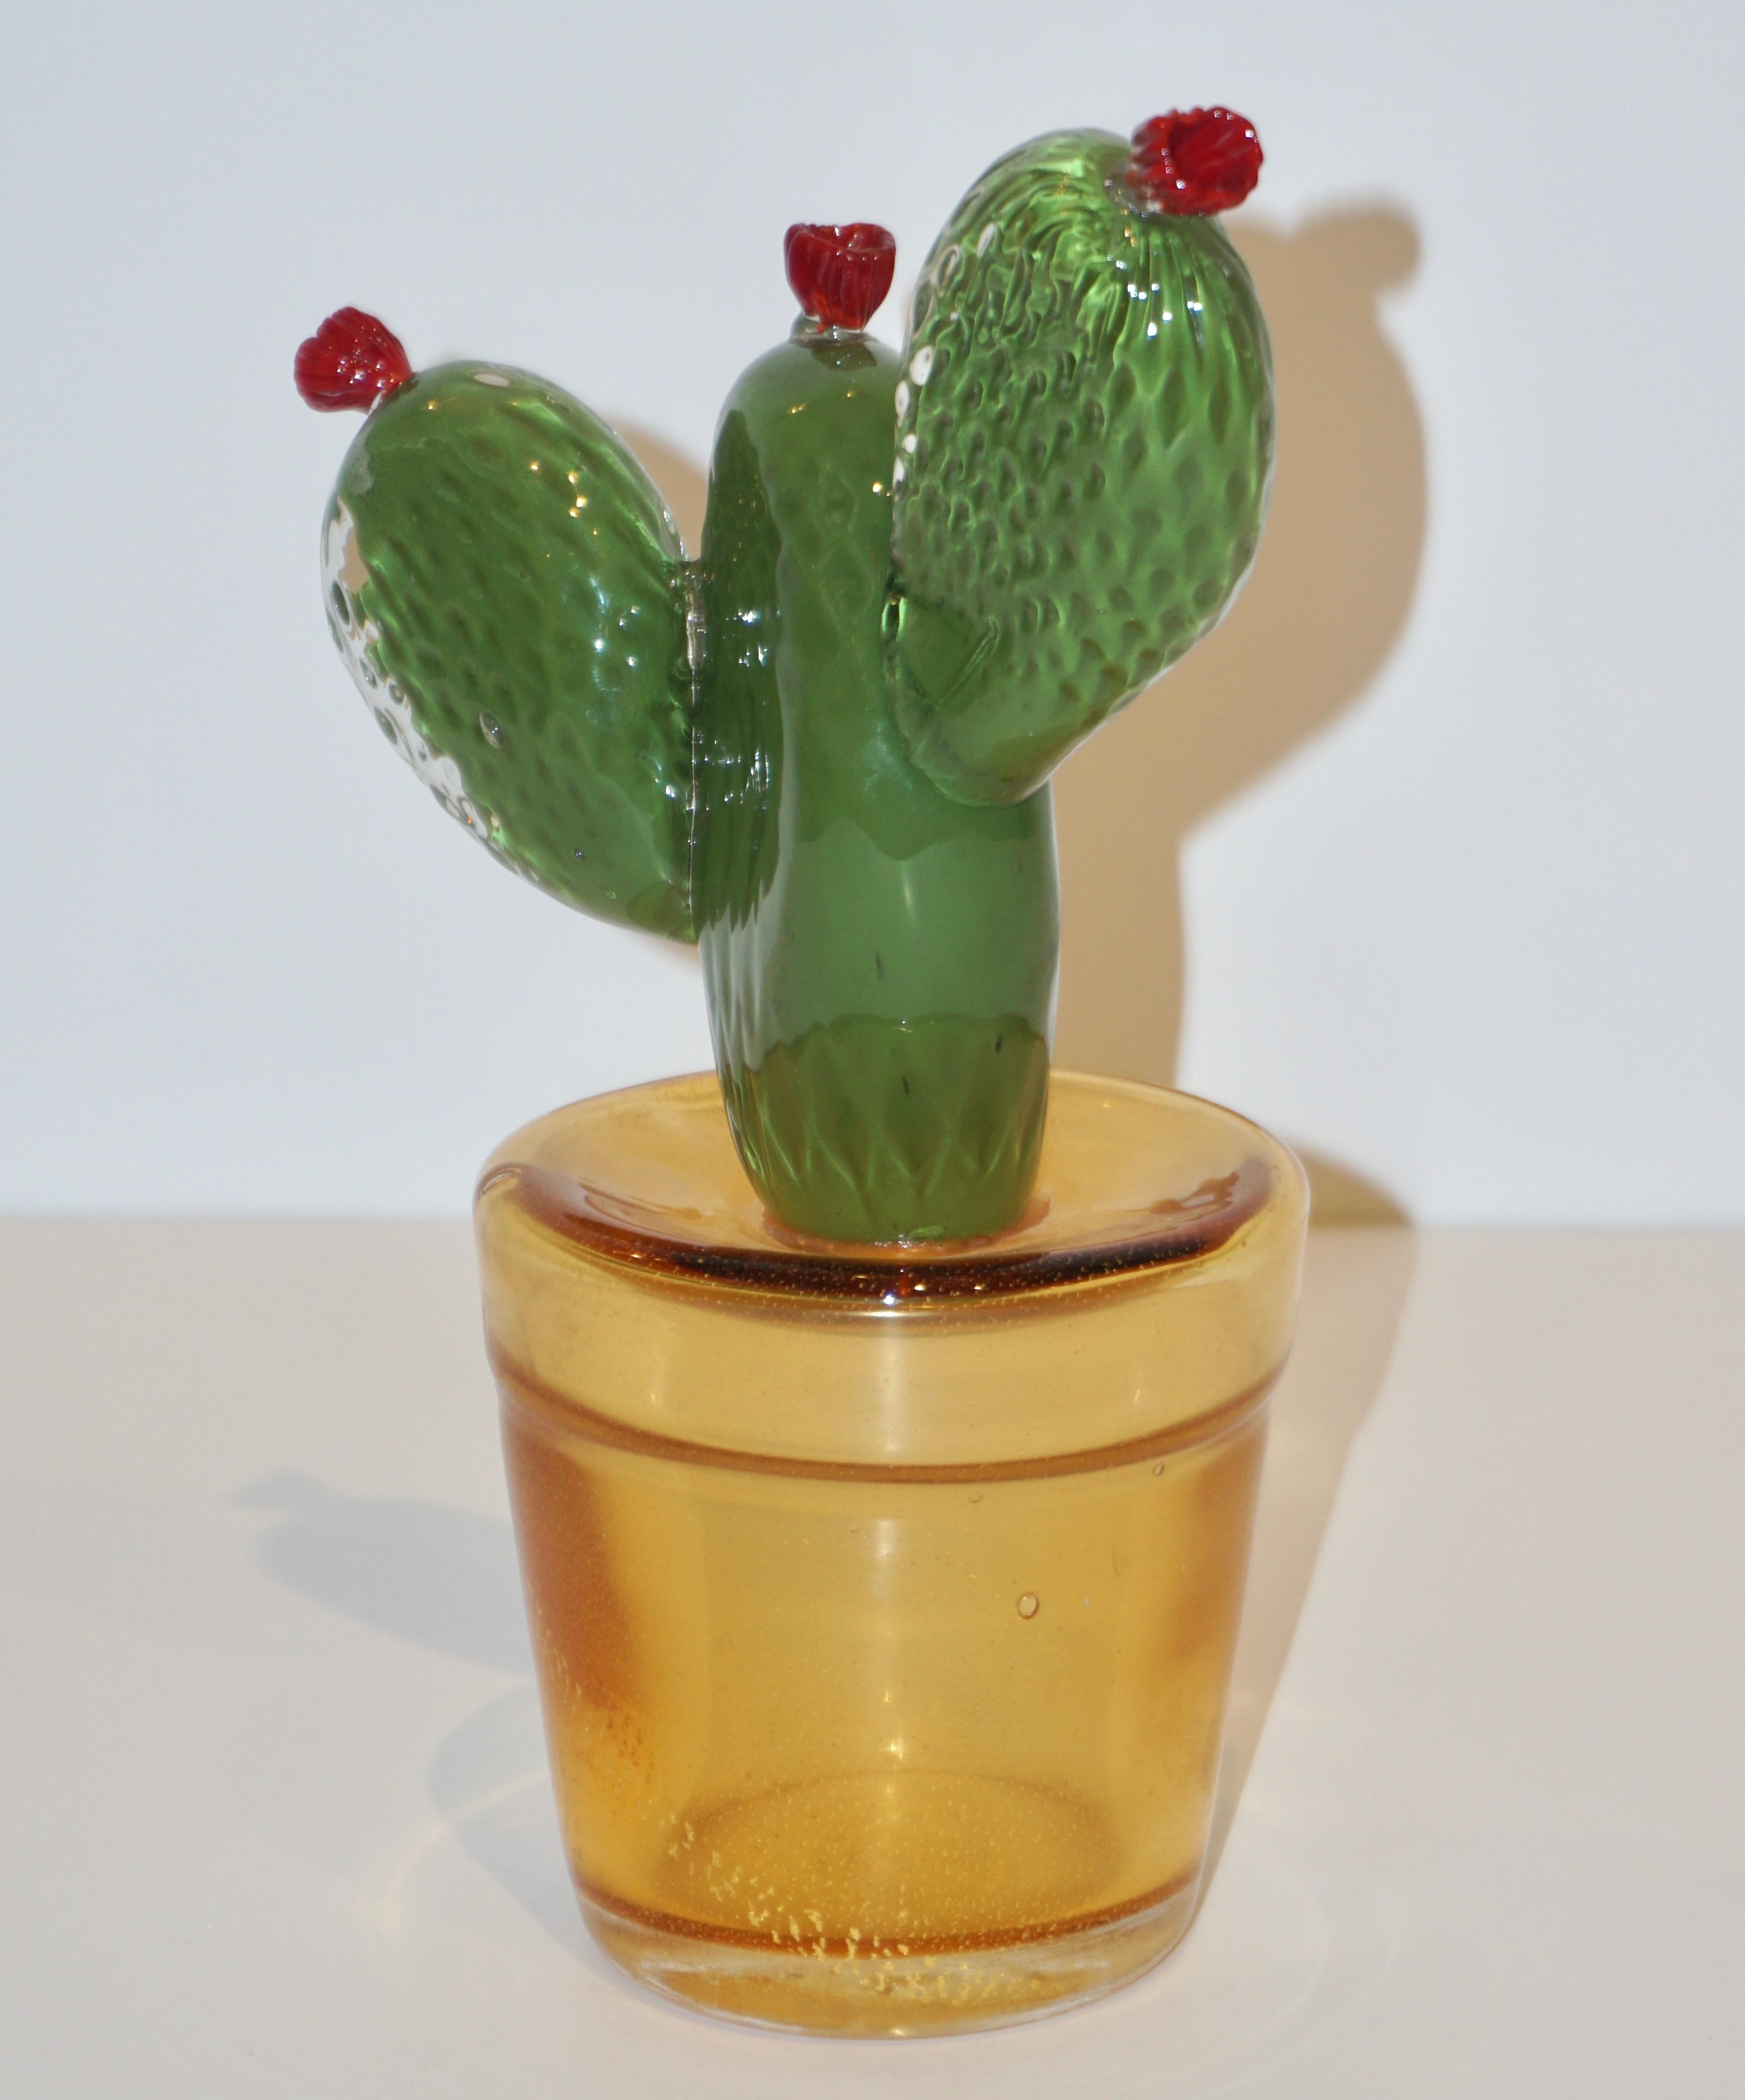 Organic Modern 1990s Vintage Italian Green Murano Art Glass Cactus Plant with Red Flowers